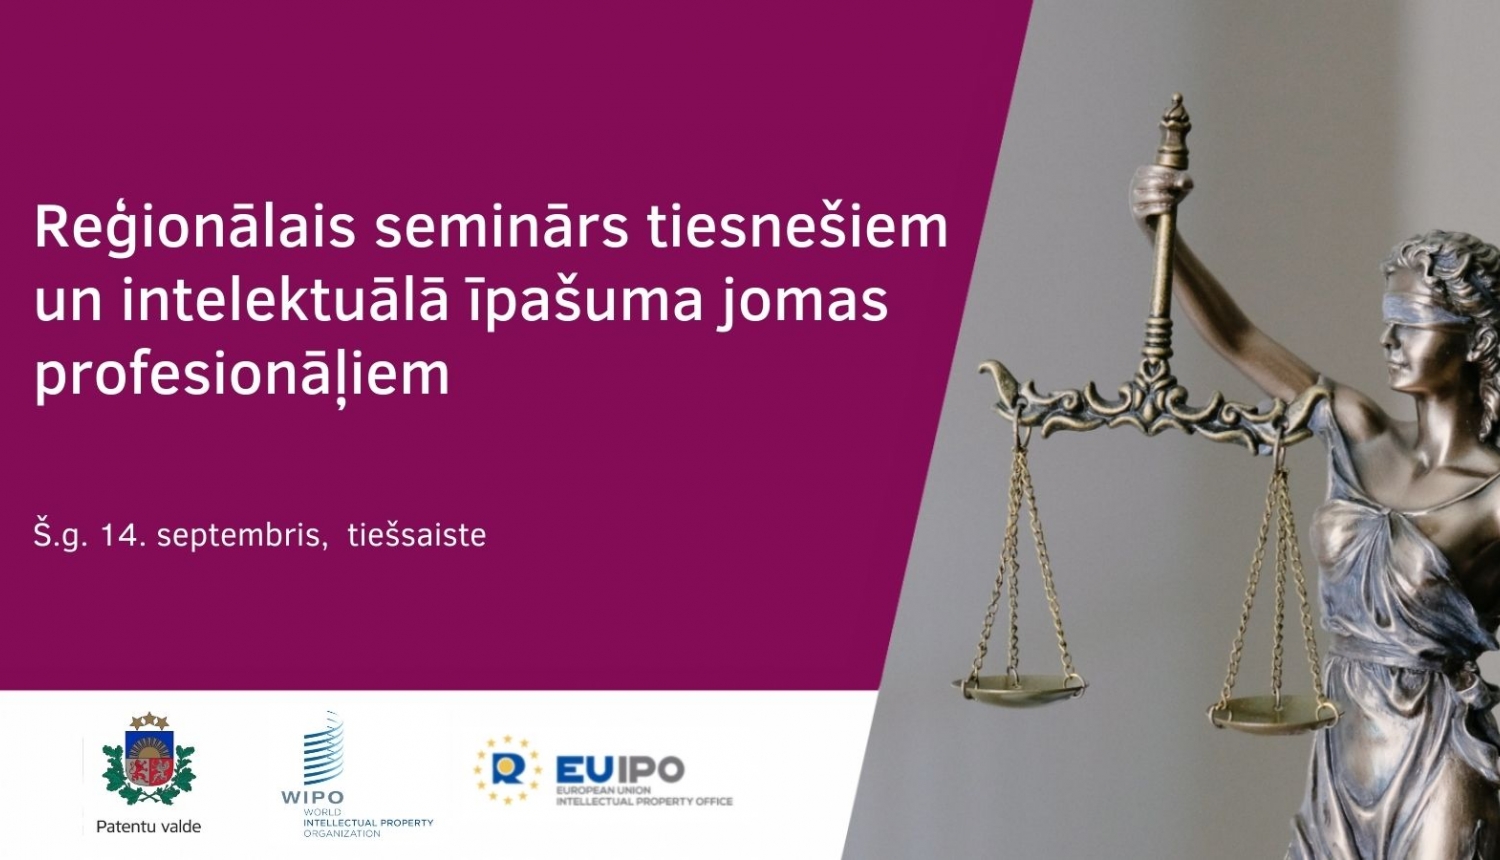 Seminar for judges and ip professionals, online event, september 14th, 2021